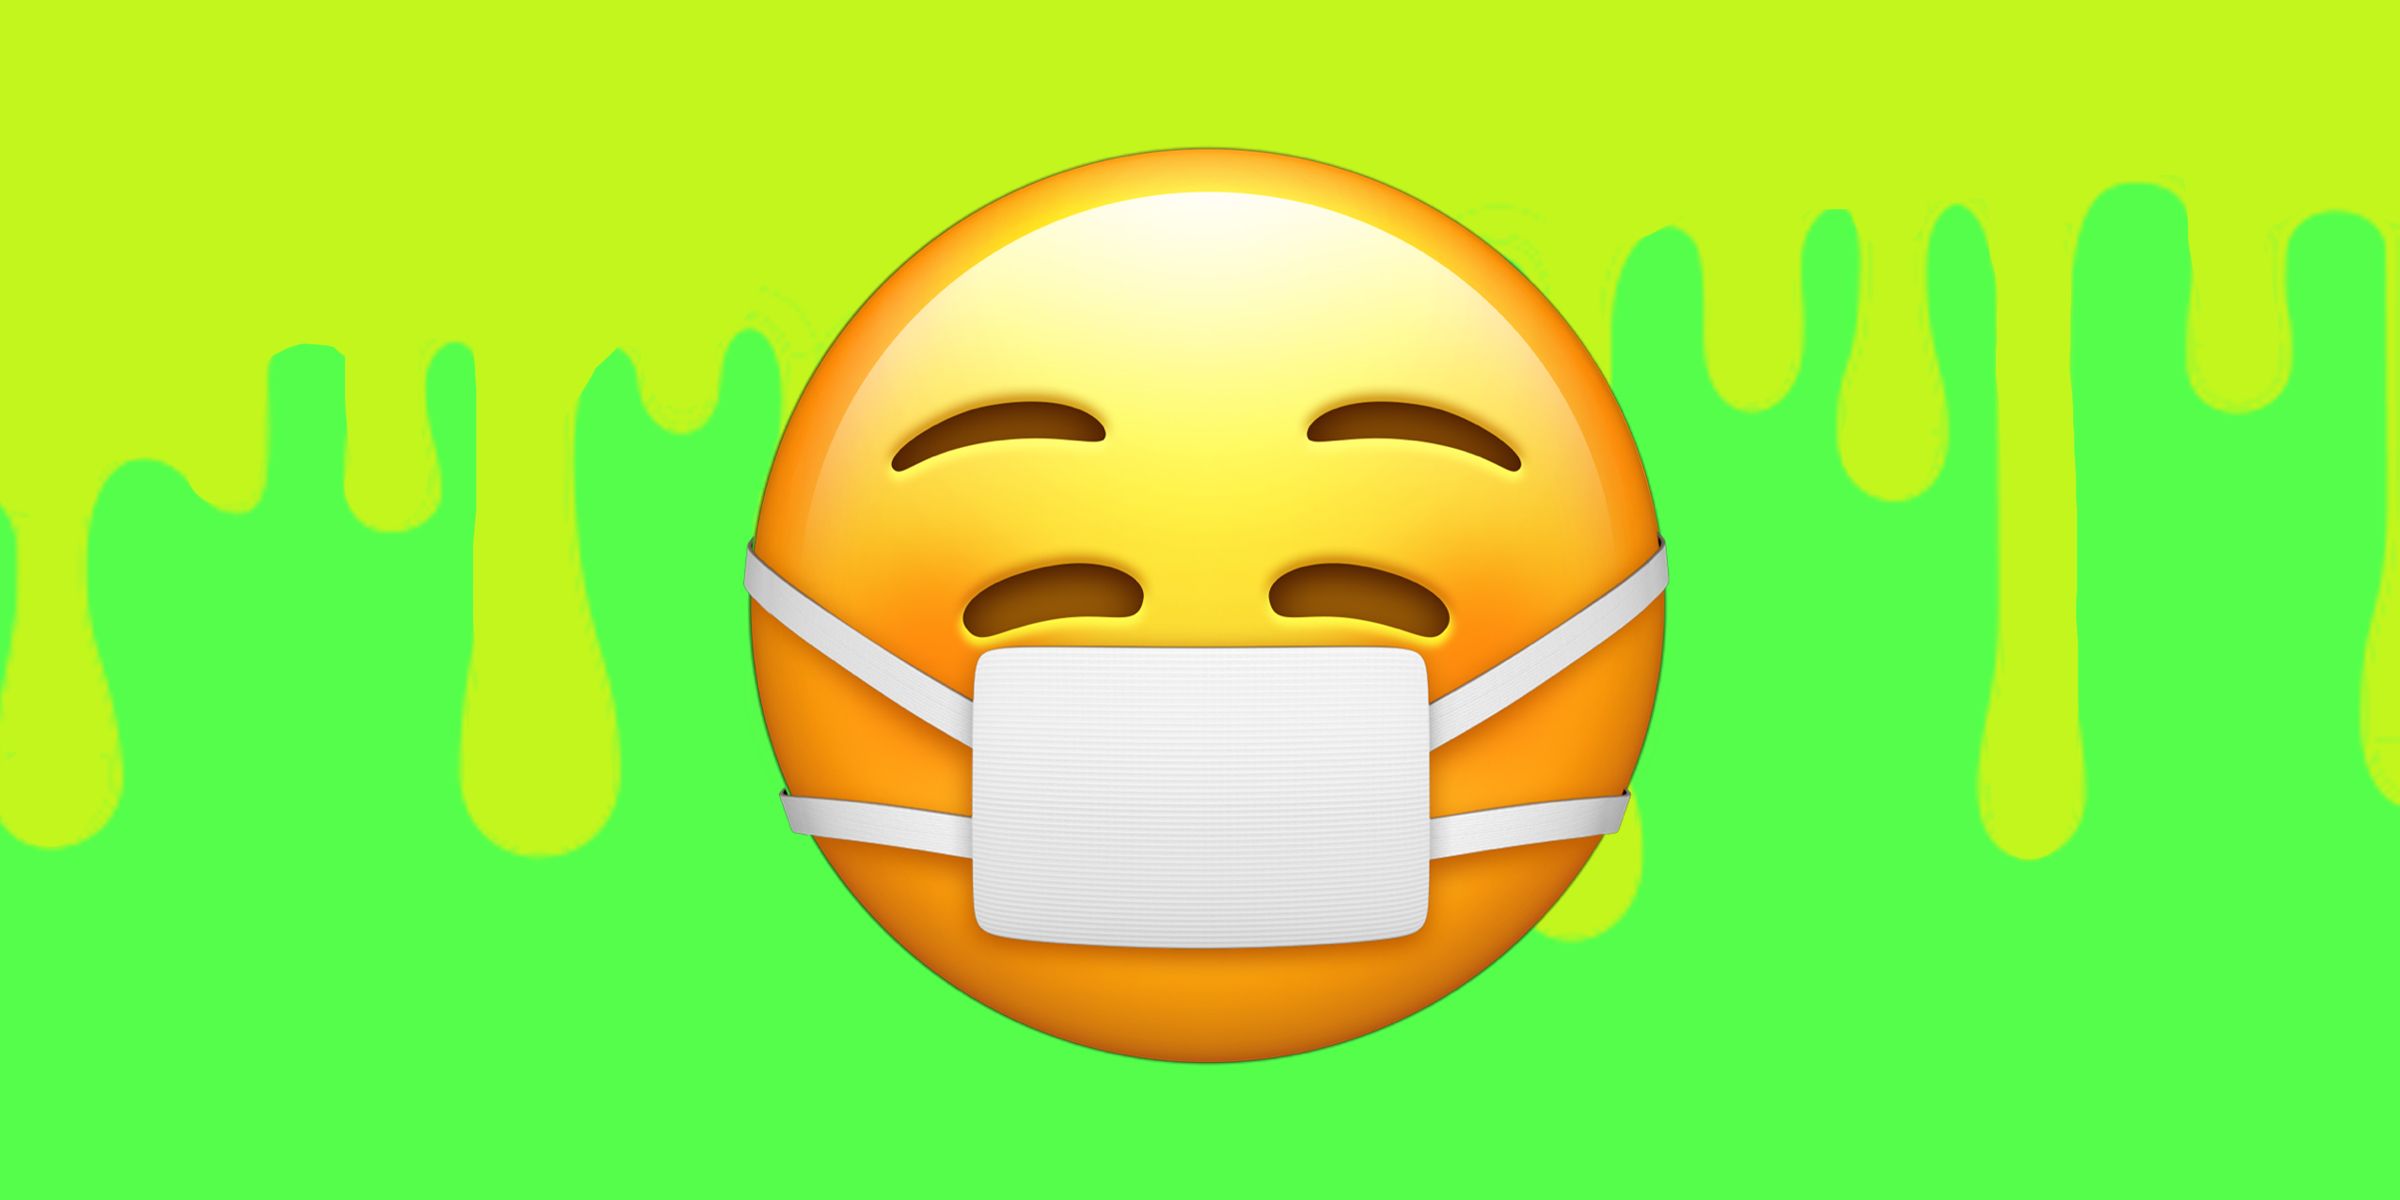 Apple updates mask emoji with smiling eyes for pandemic times